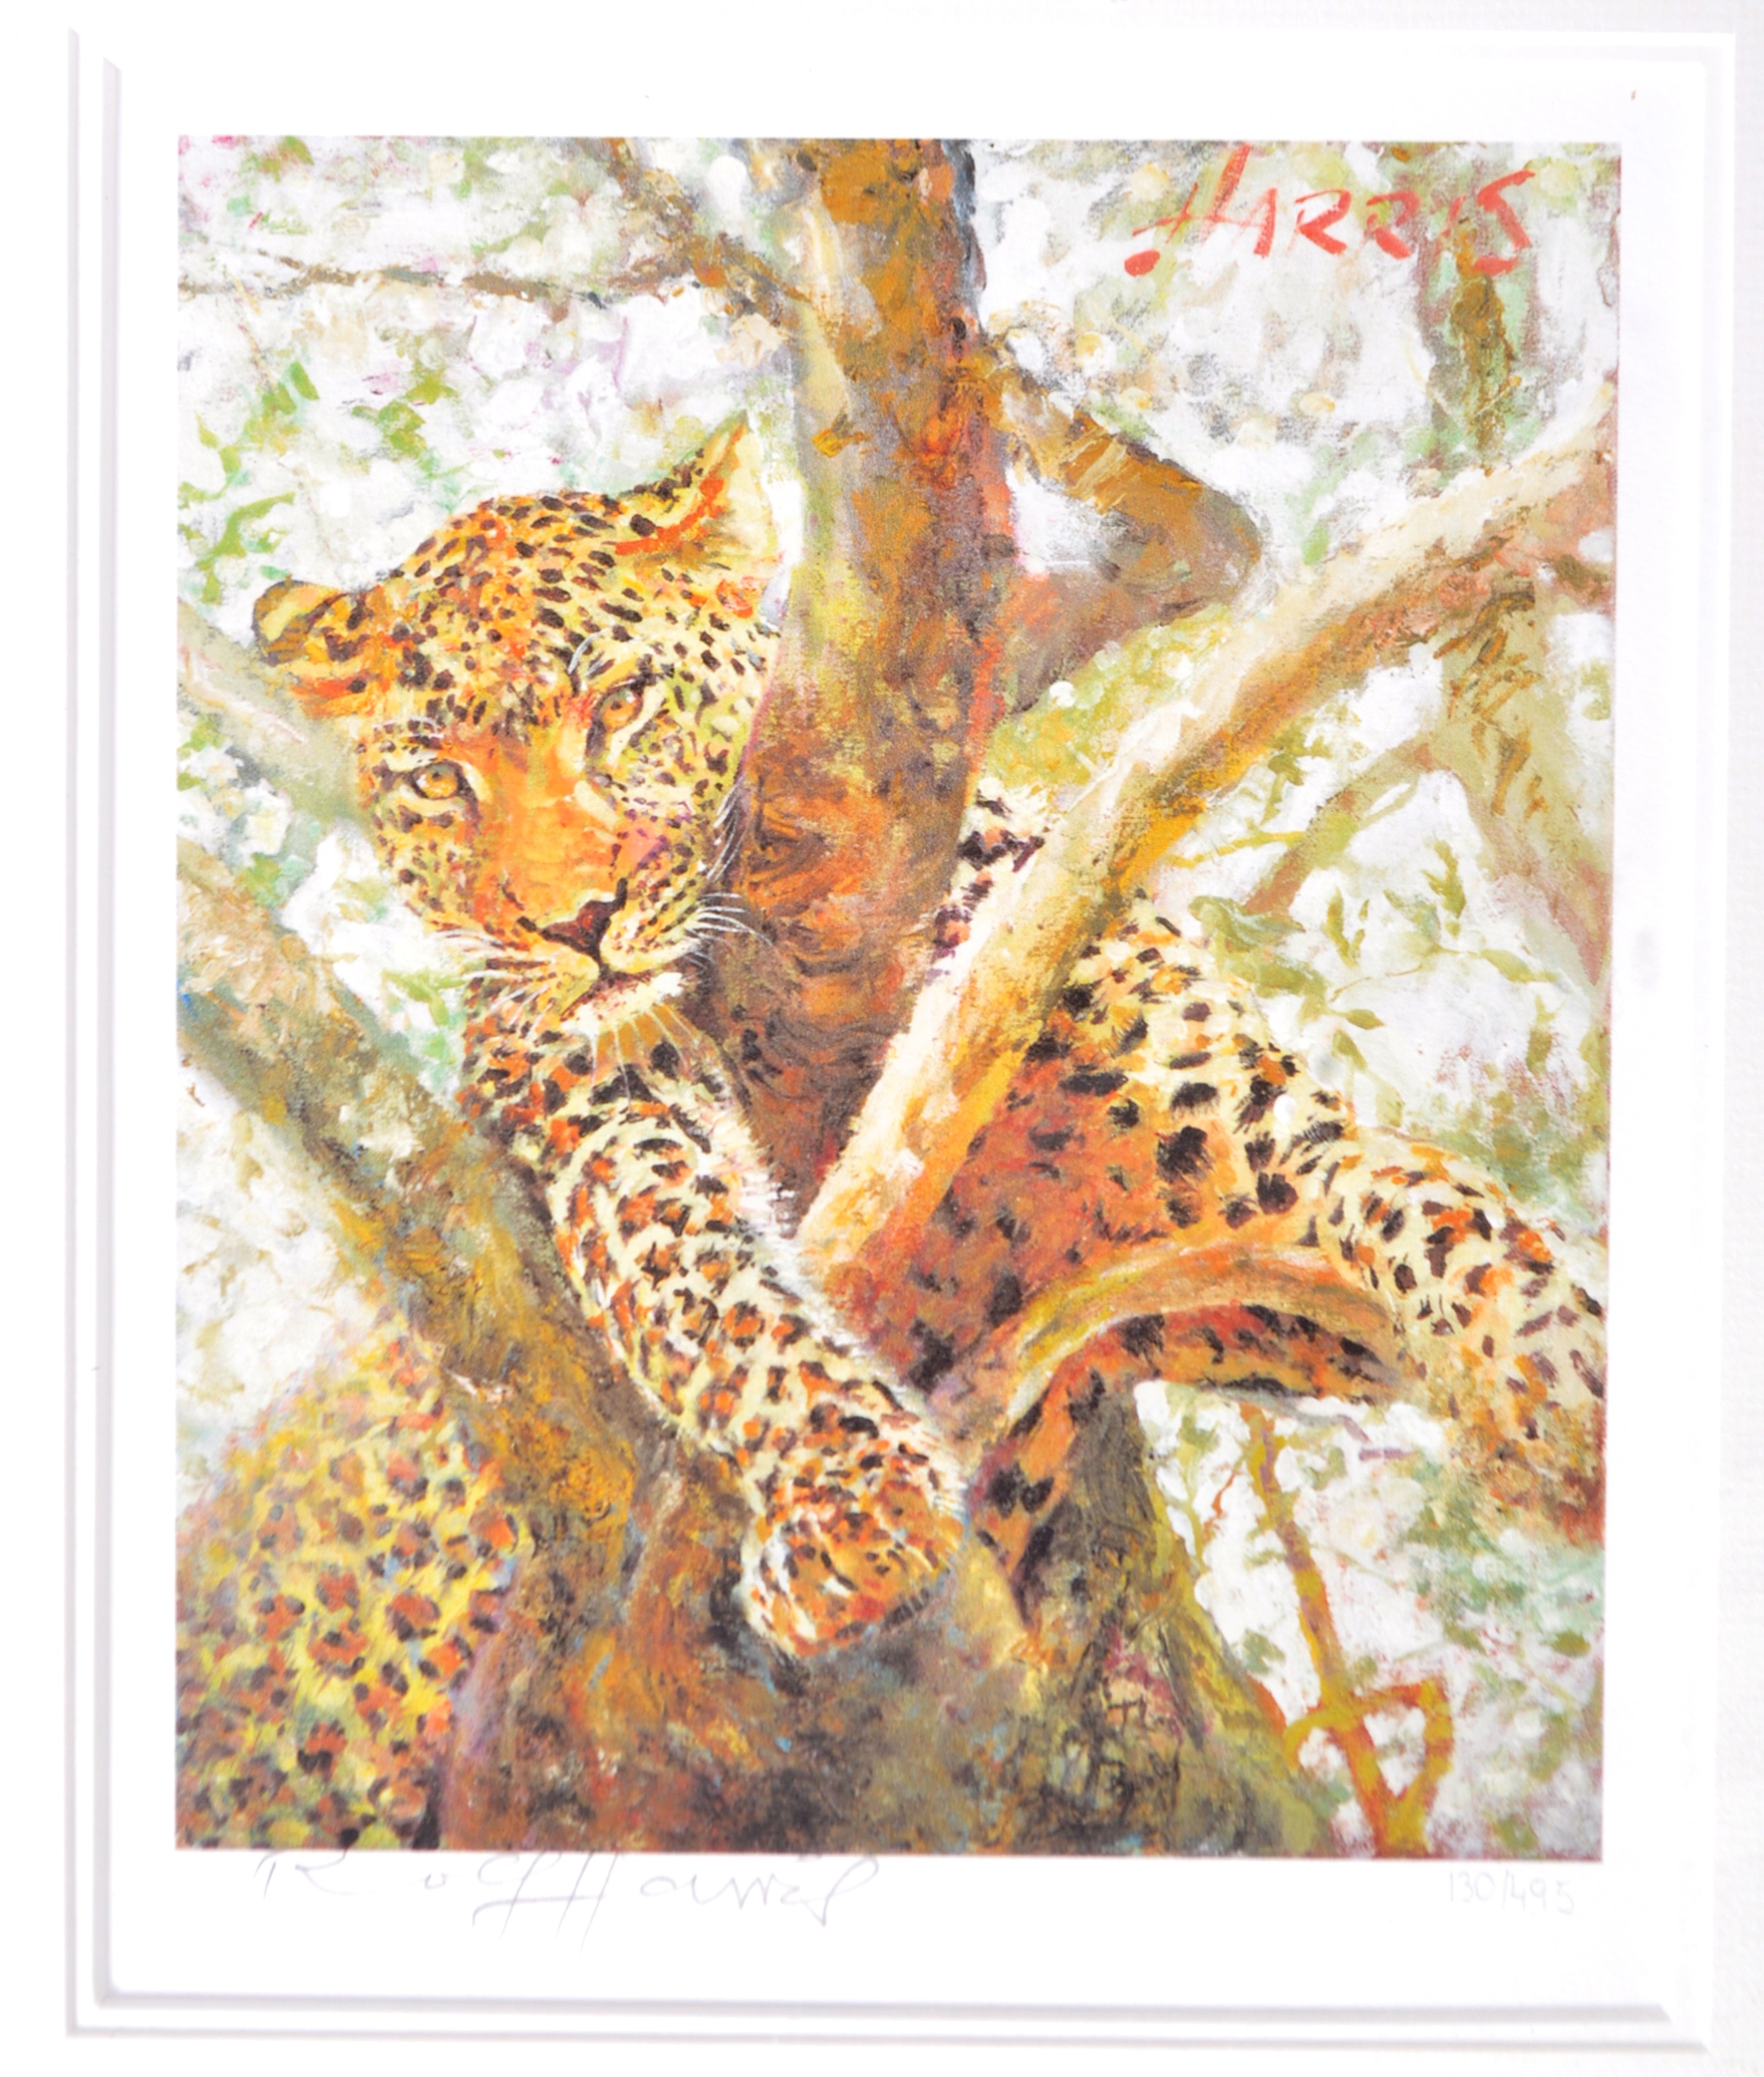 ROLF HARRIS - WORLD OF WILDLIFE SIGNED PRINT AND BOOKS - Image 2 of 8